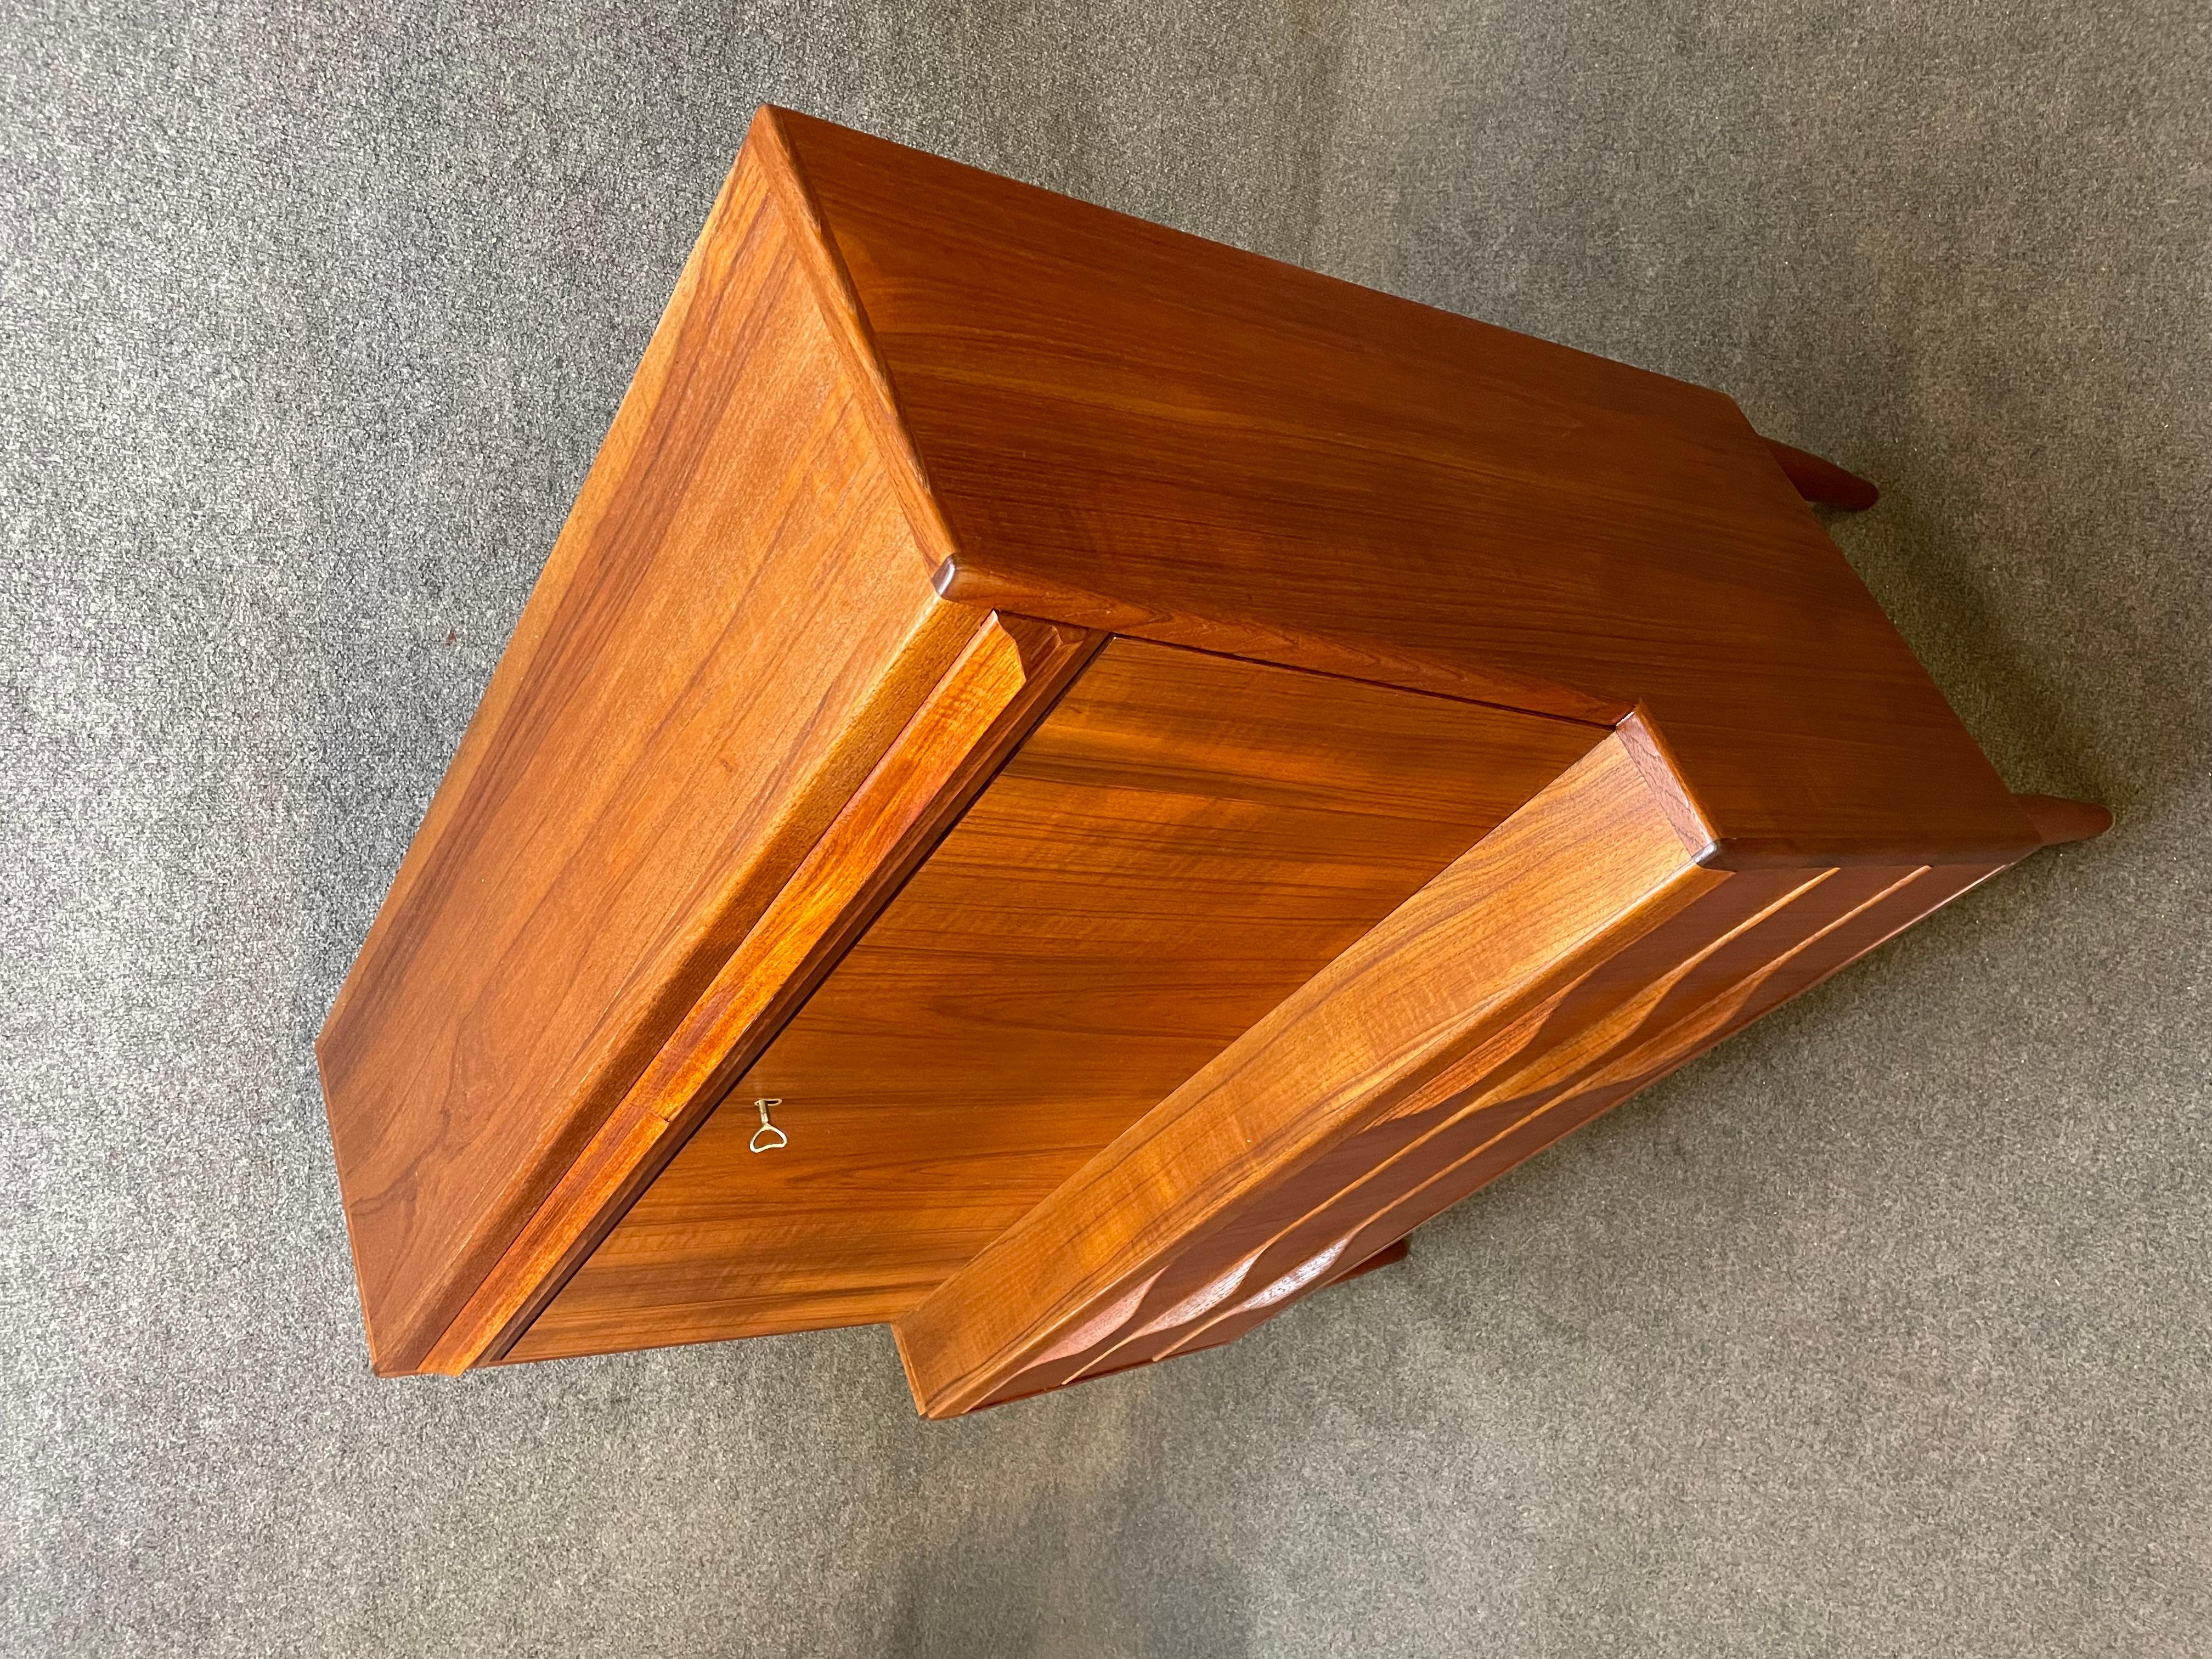 Vintage Danish Mid-Century Modern Teal Secretary Desk by Erling Torvitz In Good Condition For Sale In San Marcos, CA